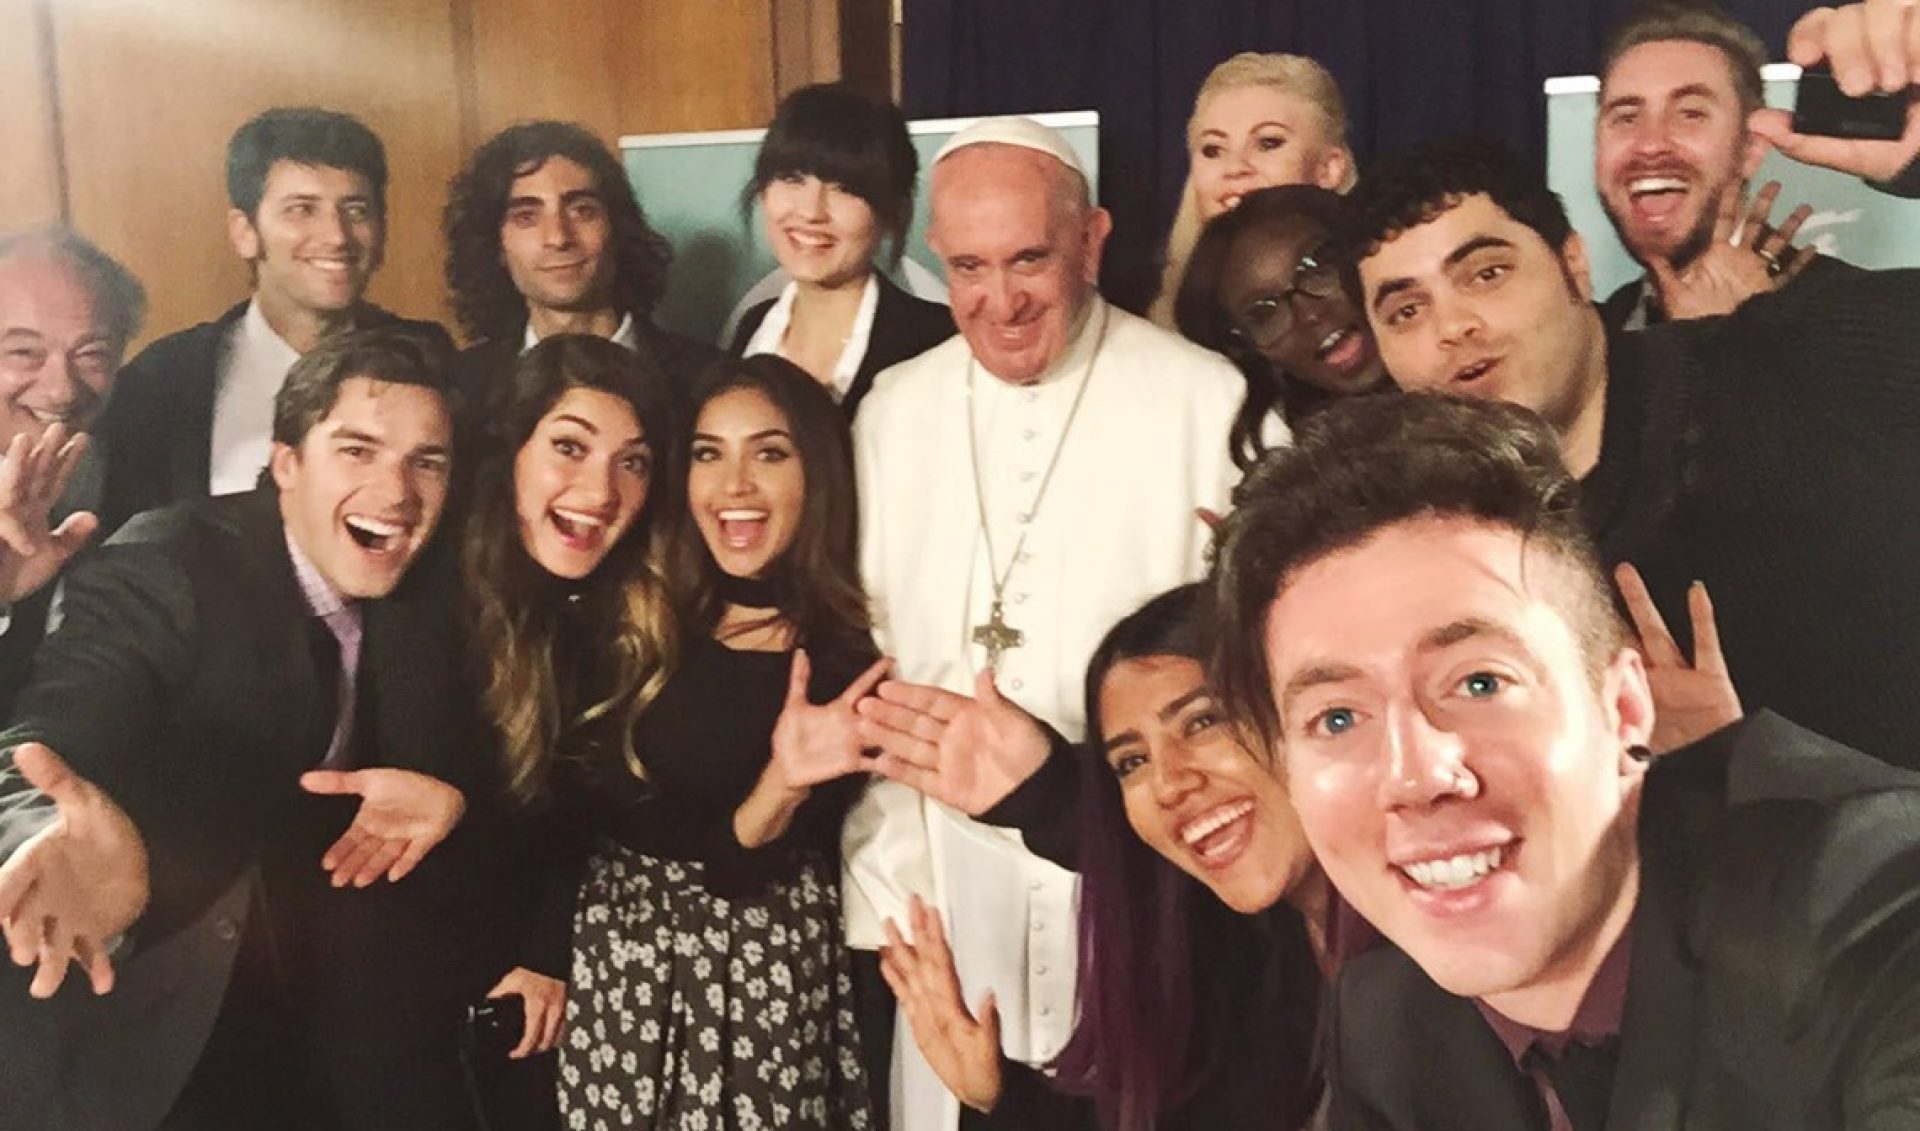 Pope Francis Meets With YouTube Stars To Spread Tolerance And Understanding